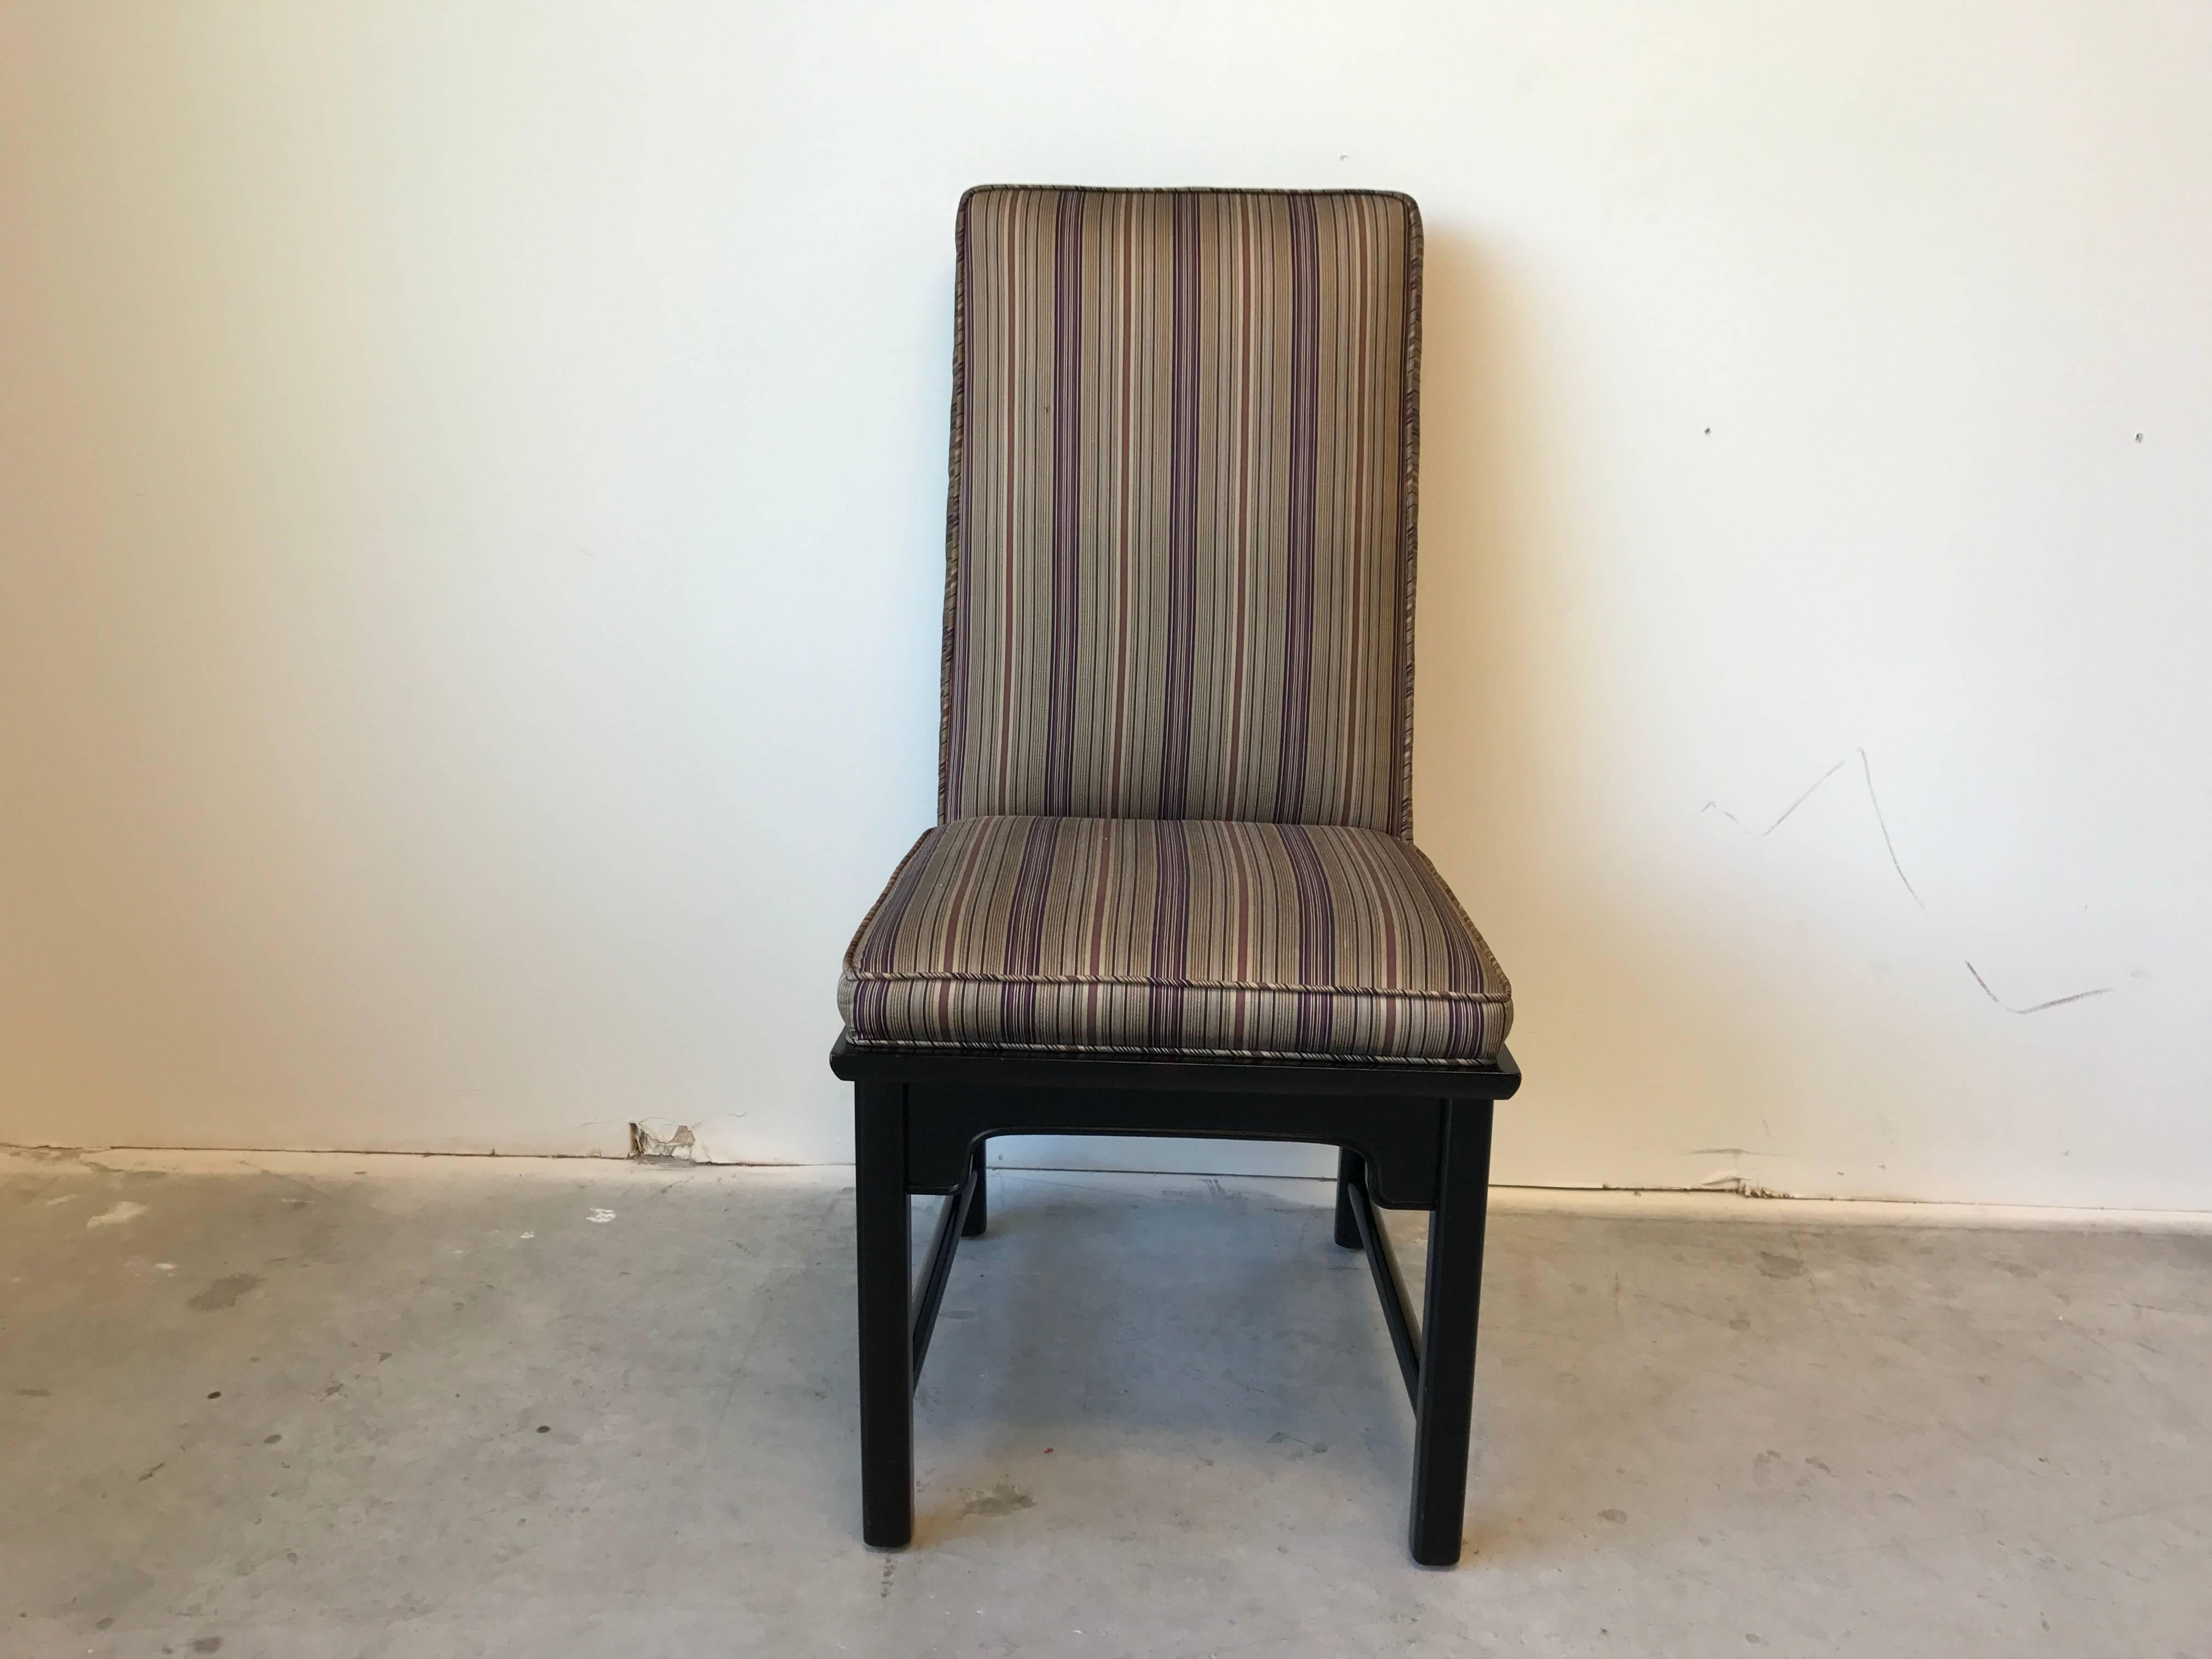 Offered is a gorgeous, set of four, 1980s century Furniture Ming style armless dining side chairs. Black/ebony bases. The frames are in excellent condition. Needs new upholstery, foam is in great condition. Perfect touch of Asian-modern.